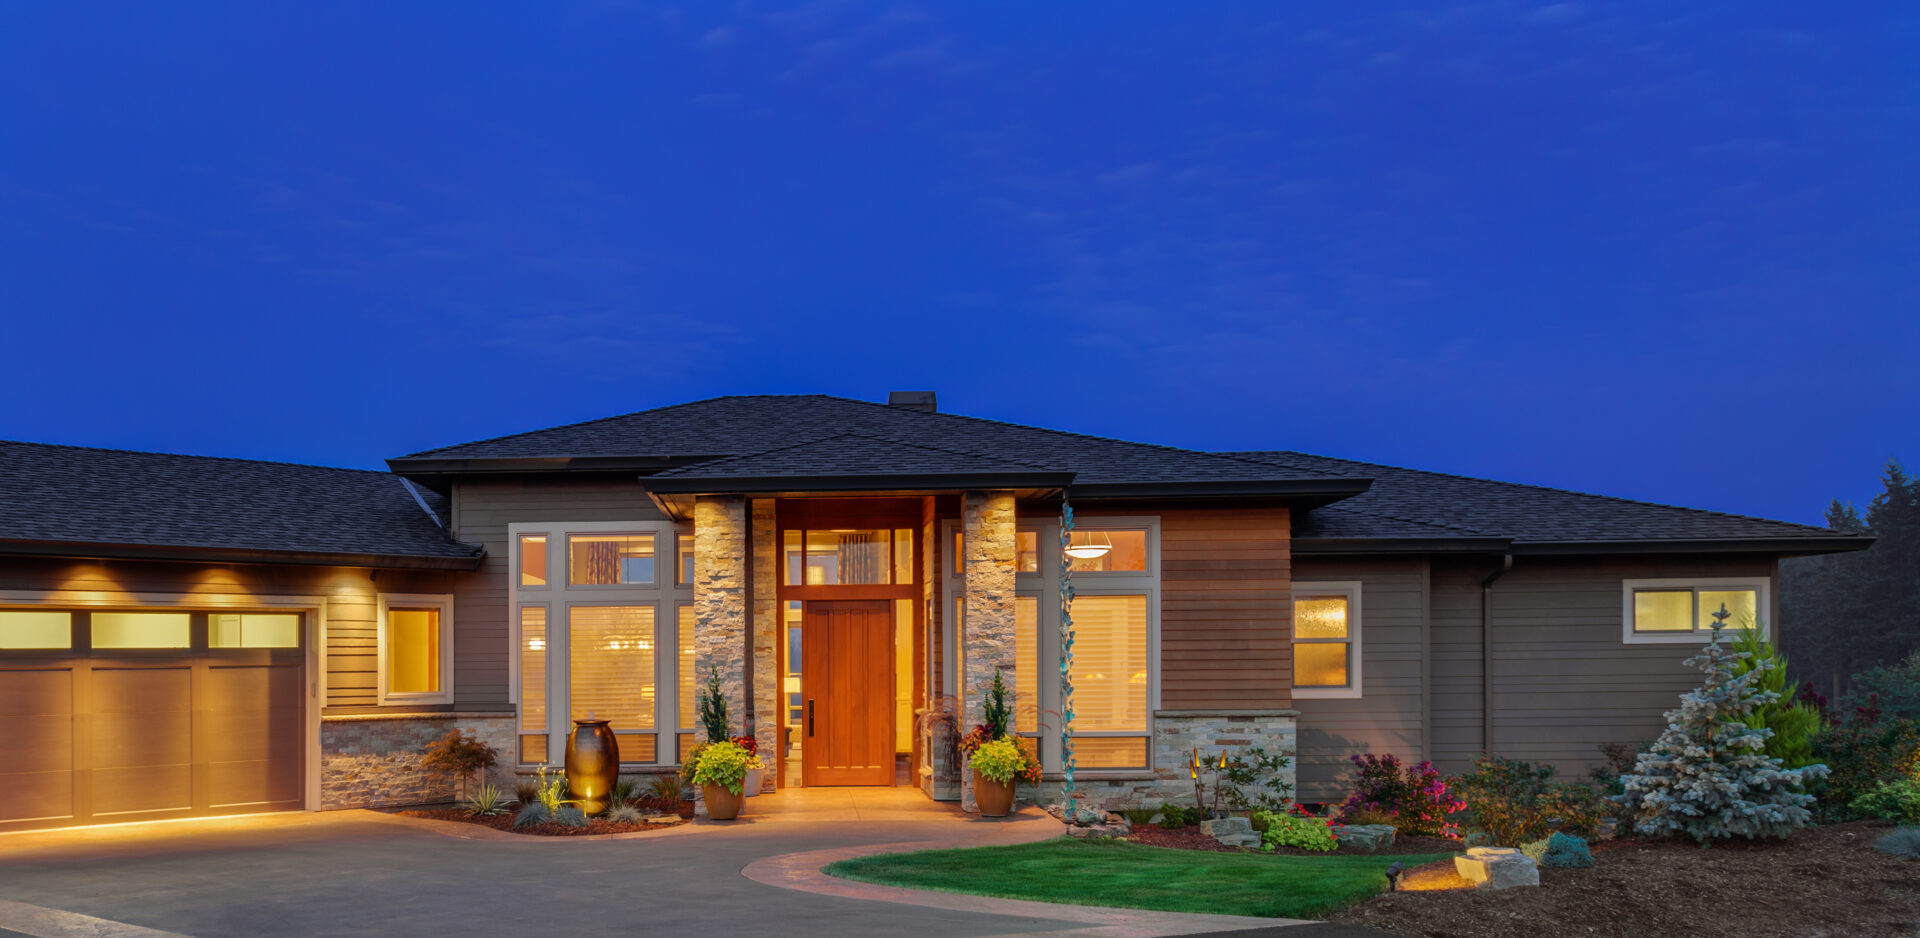 Well-lit home in the evening with great curb appeal